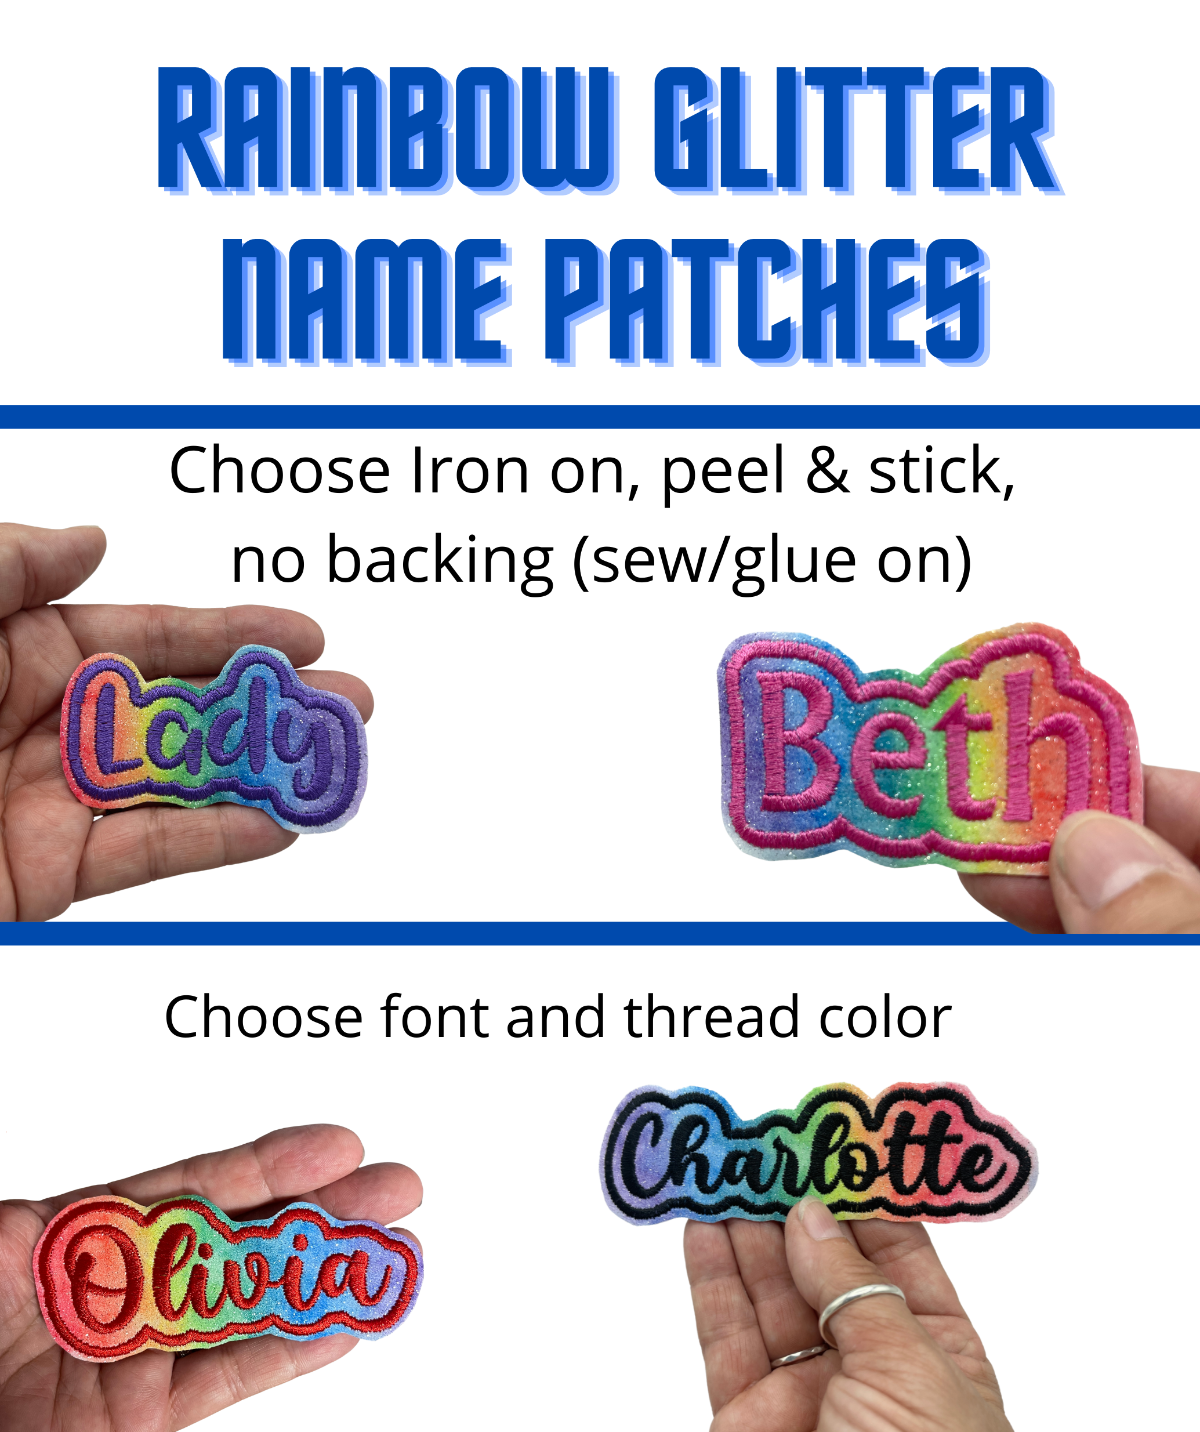 Name Patch Custom Personalized Personalized Bling Glitter Patch